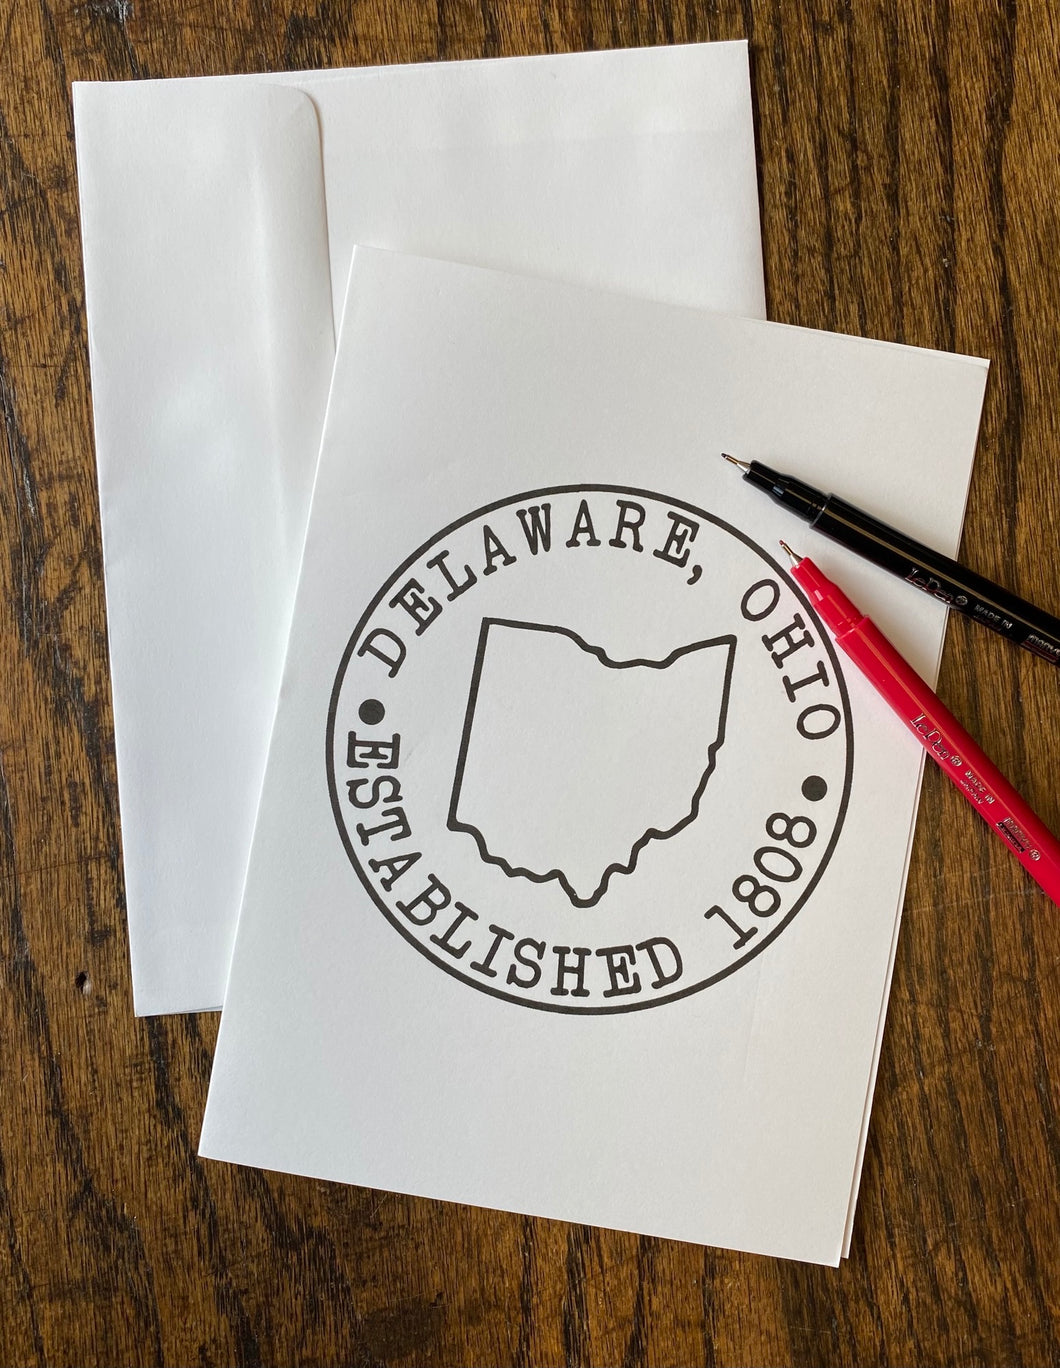 Delaware, Ohio Stamp Coloring Card